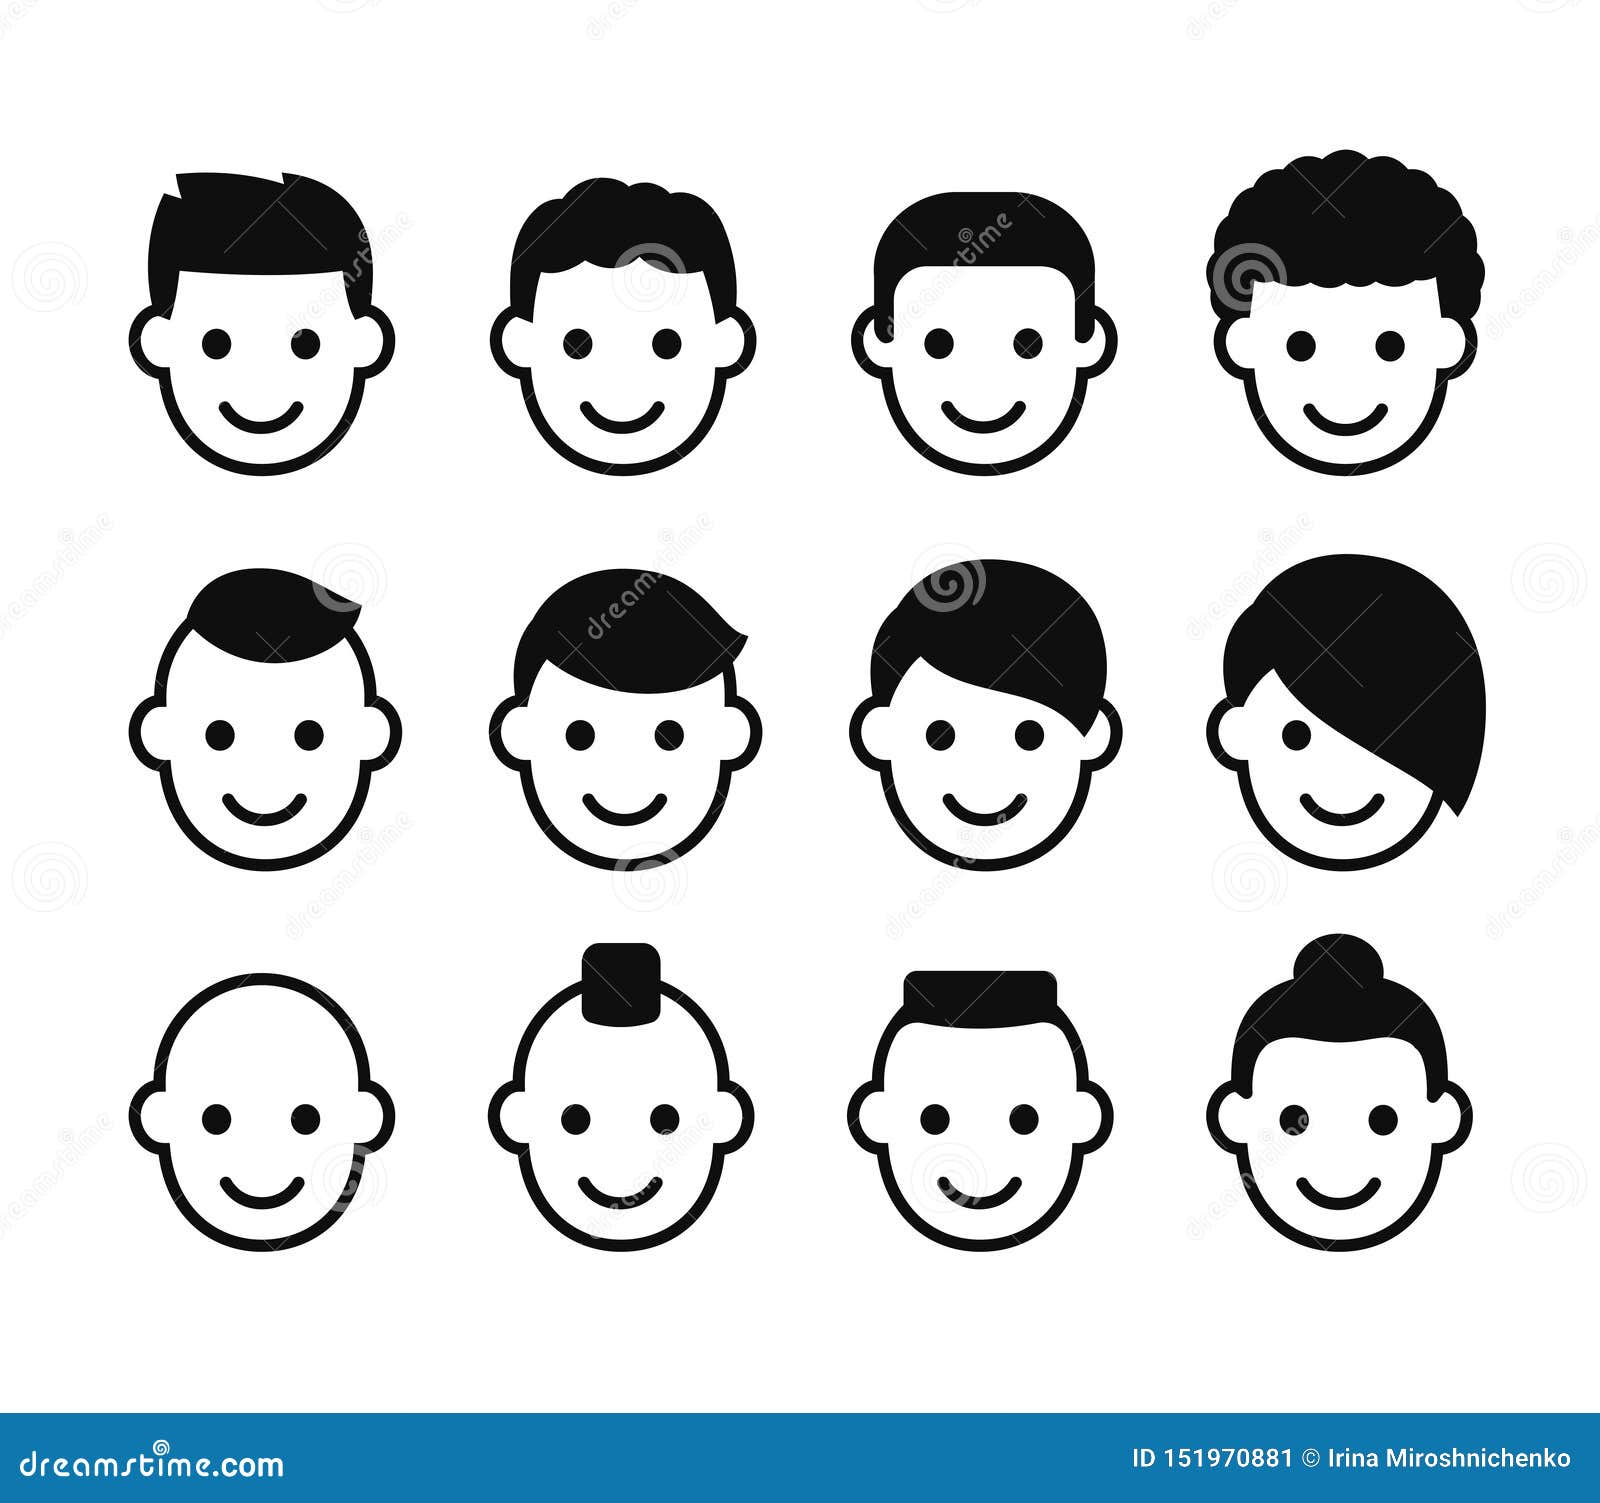 Male hairstyles icon set stock vector. Illustration of face - 151970881